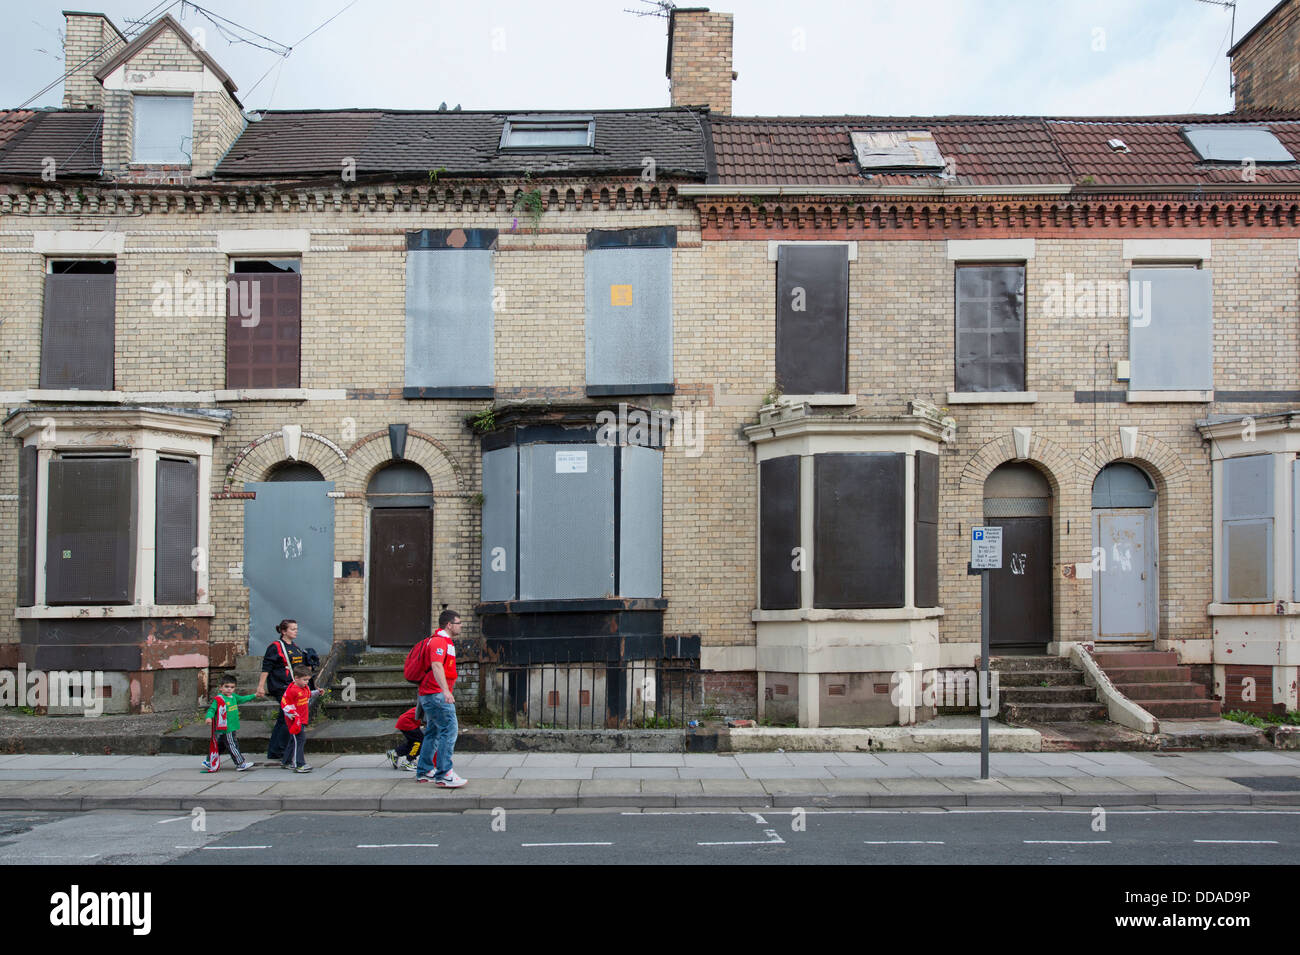 A family of Liverpool supporters walk past condemned houses in Anfield on the way to the stadium (Editorial use only). Stock Photo